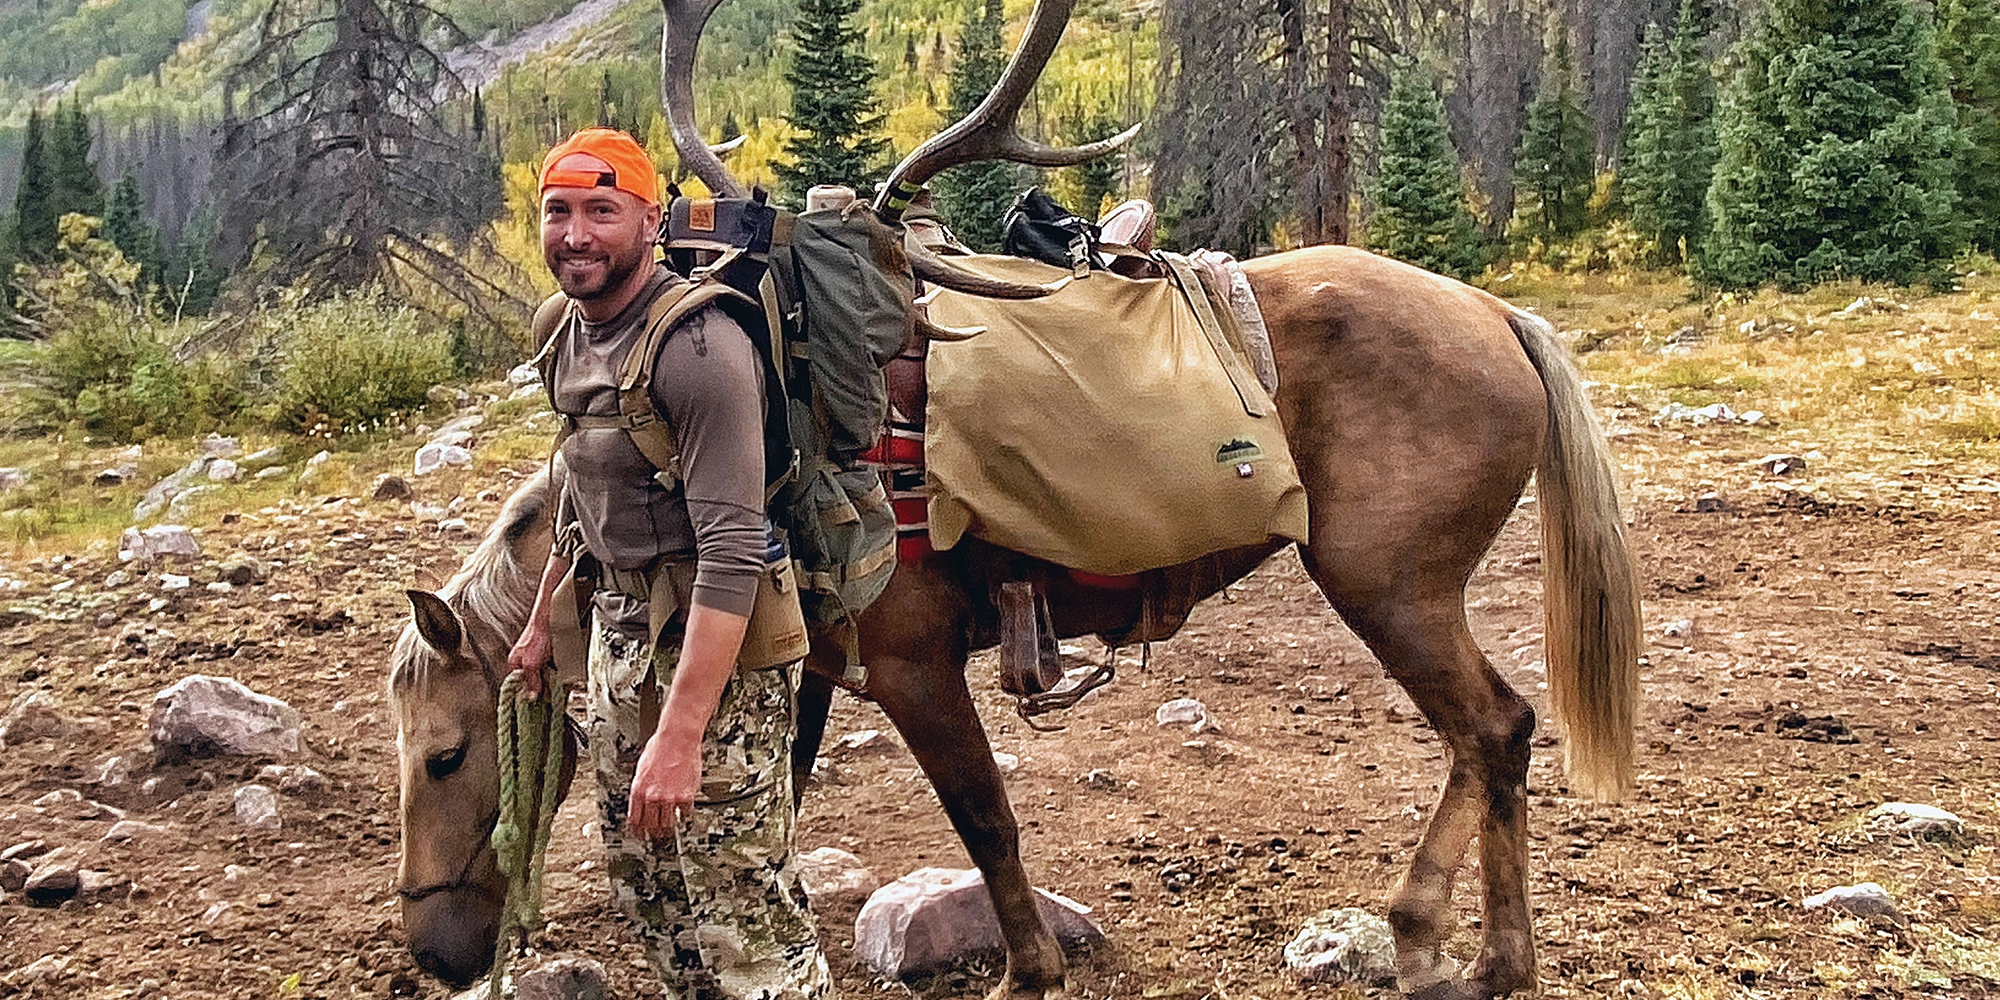 the author's friend, Jaron, with a mature 6-point bull killed 22 miles from the trailhead.